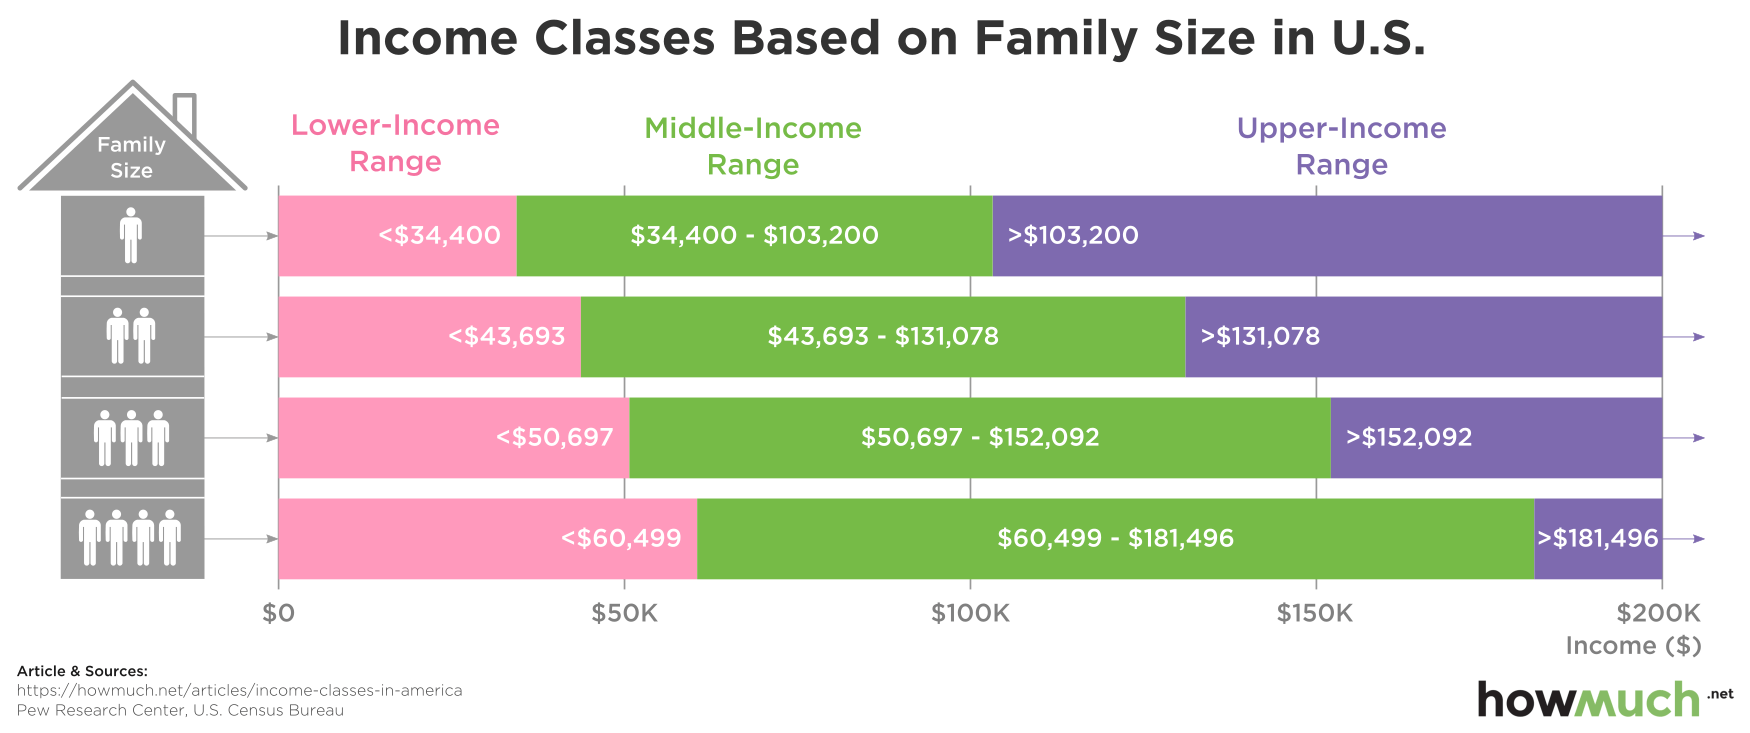 lower middle class investing